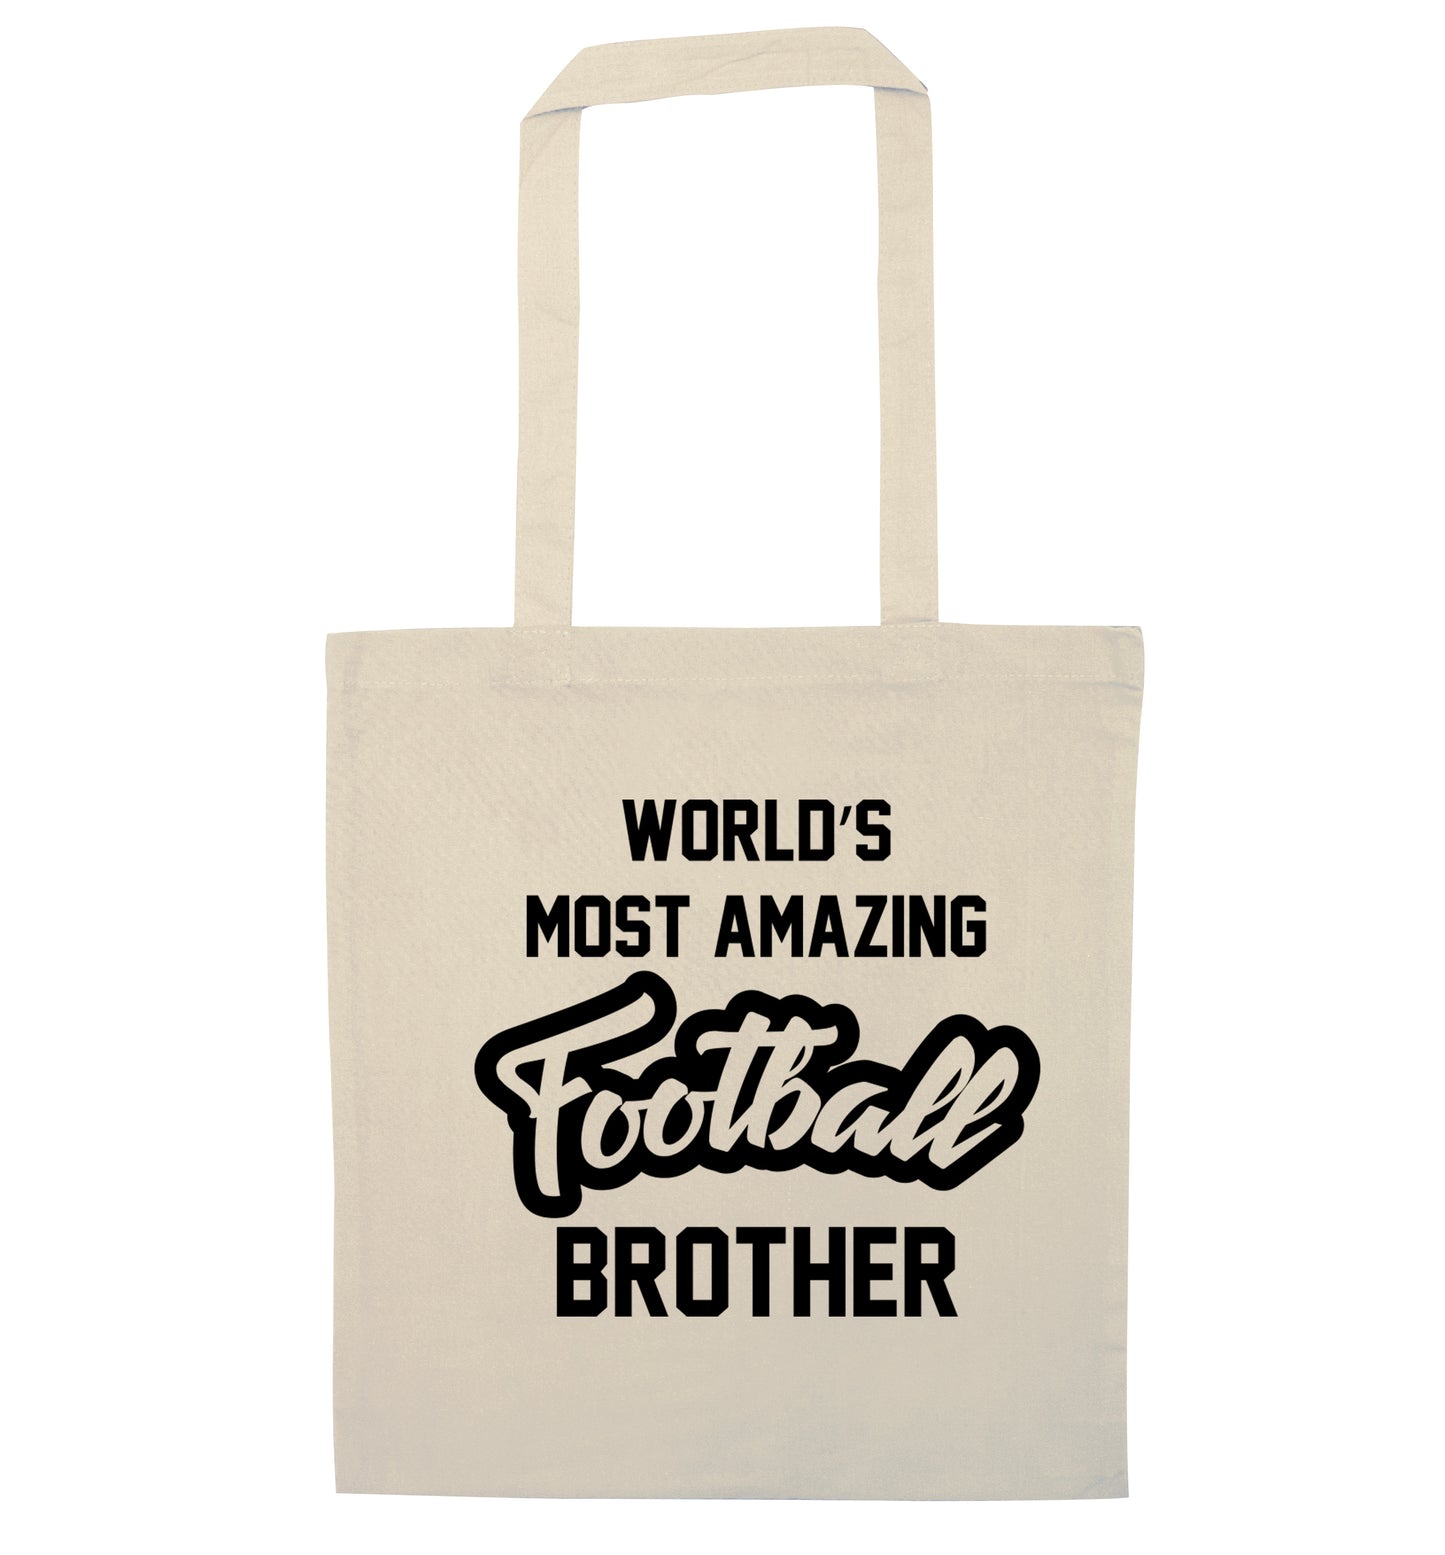 Worlds most amazing football brother natural tote bag